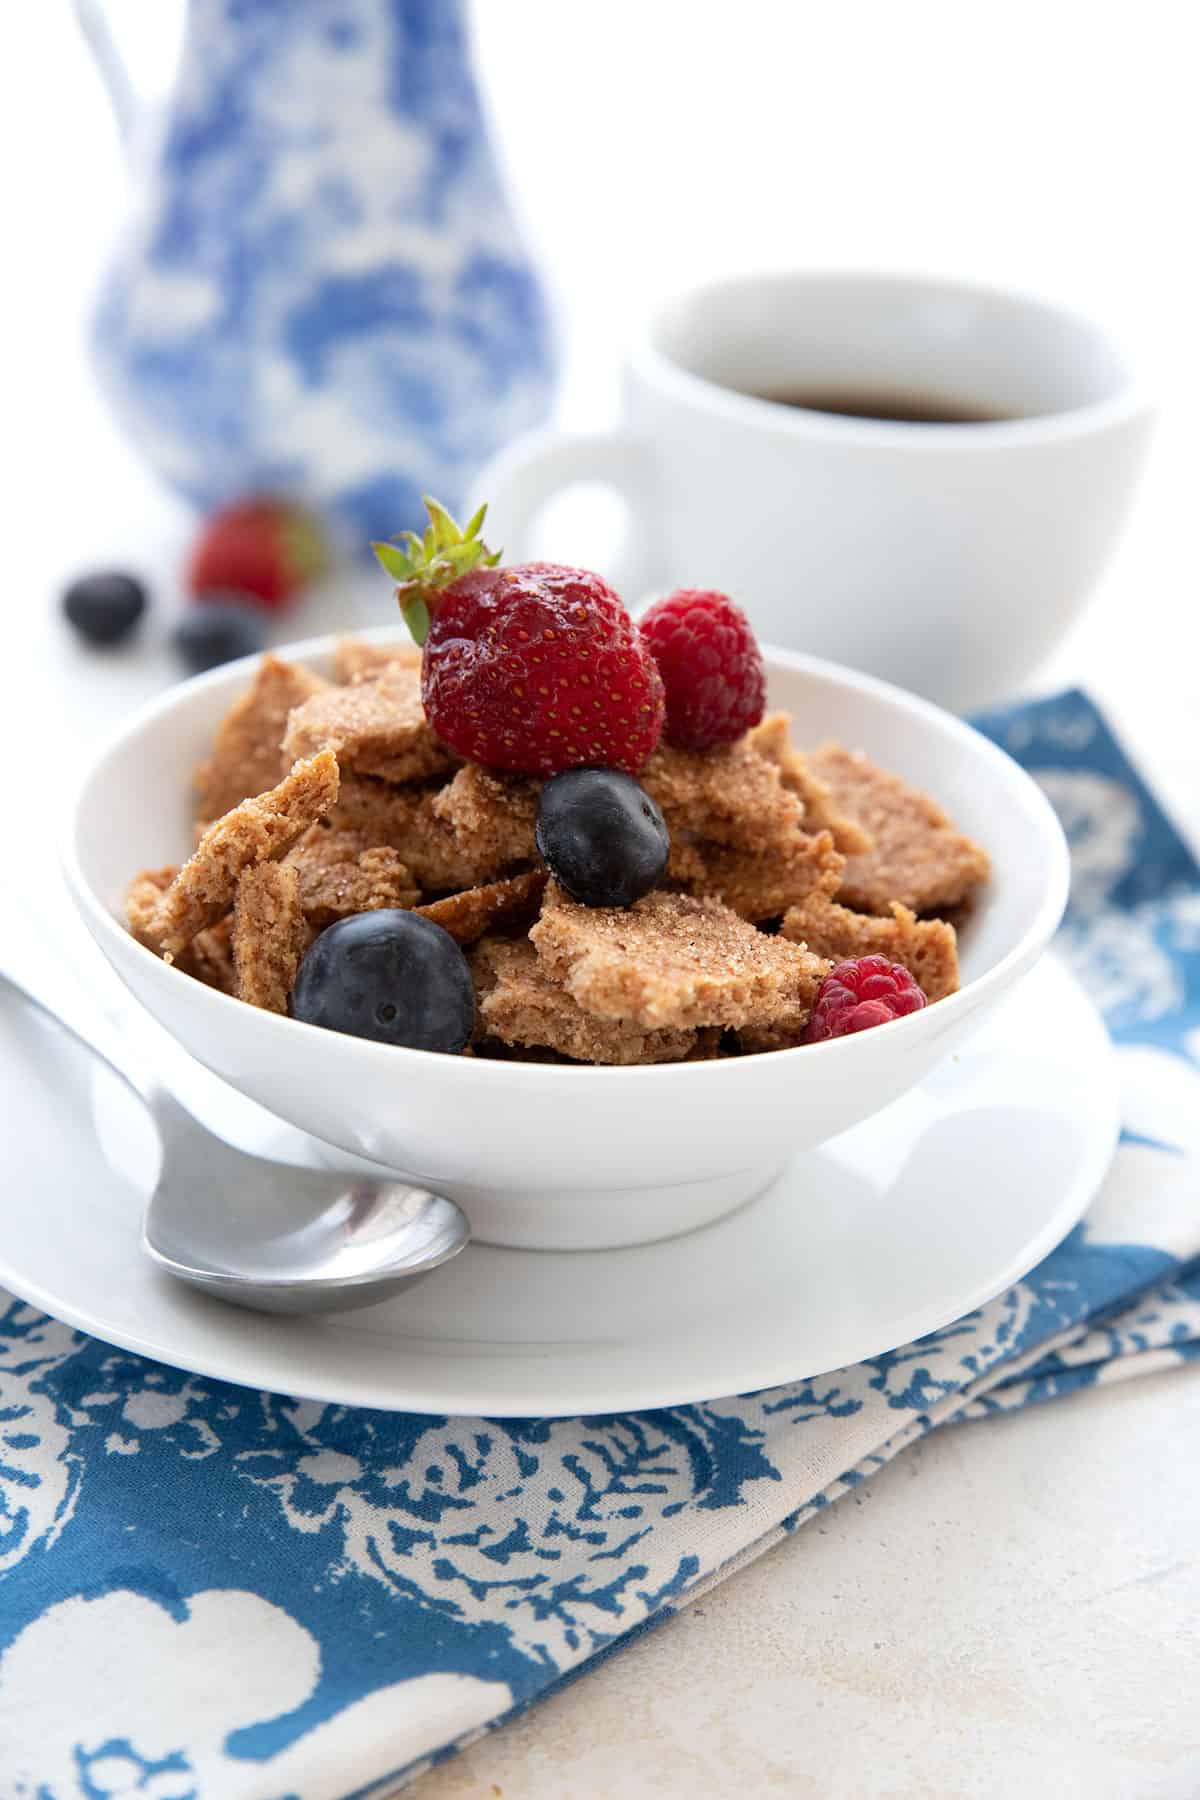 A white bowl filled with keto cereal, topped with fresh berries, over a blue patterned napkin.